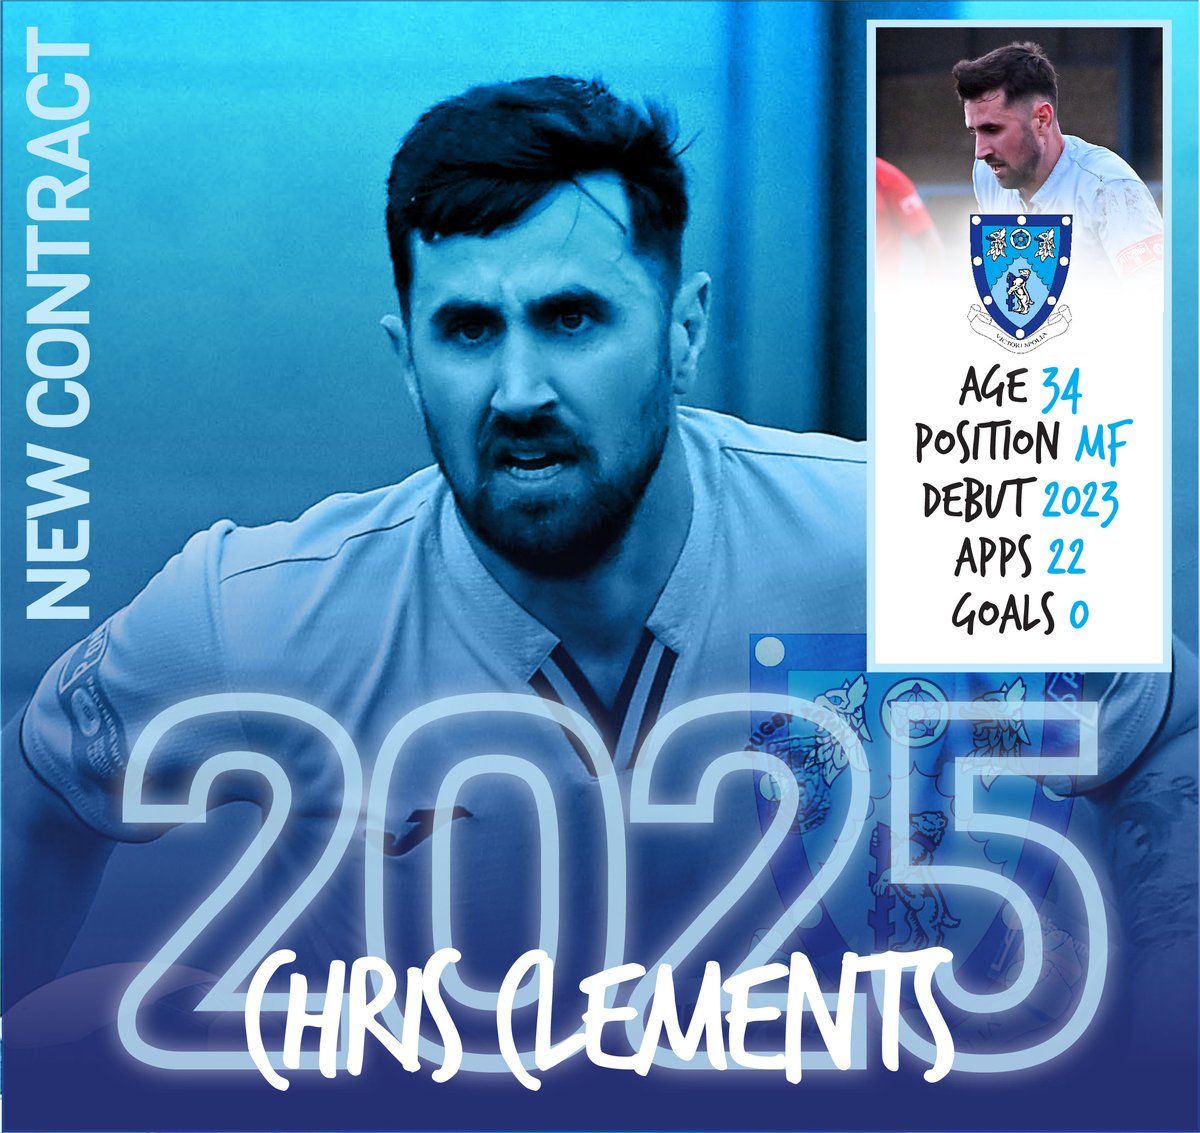 🖋️ Midfielder Chris Clements, a key player in our turnaround last season, has put pen to paper to remain with us for the 24/25 season. 🔑 Former @EFL player @clemmo14 really made his mark towards the end of the season & will look to continue that into the new campaign. #utv